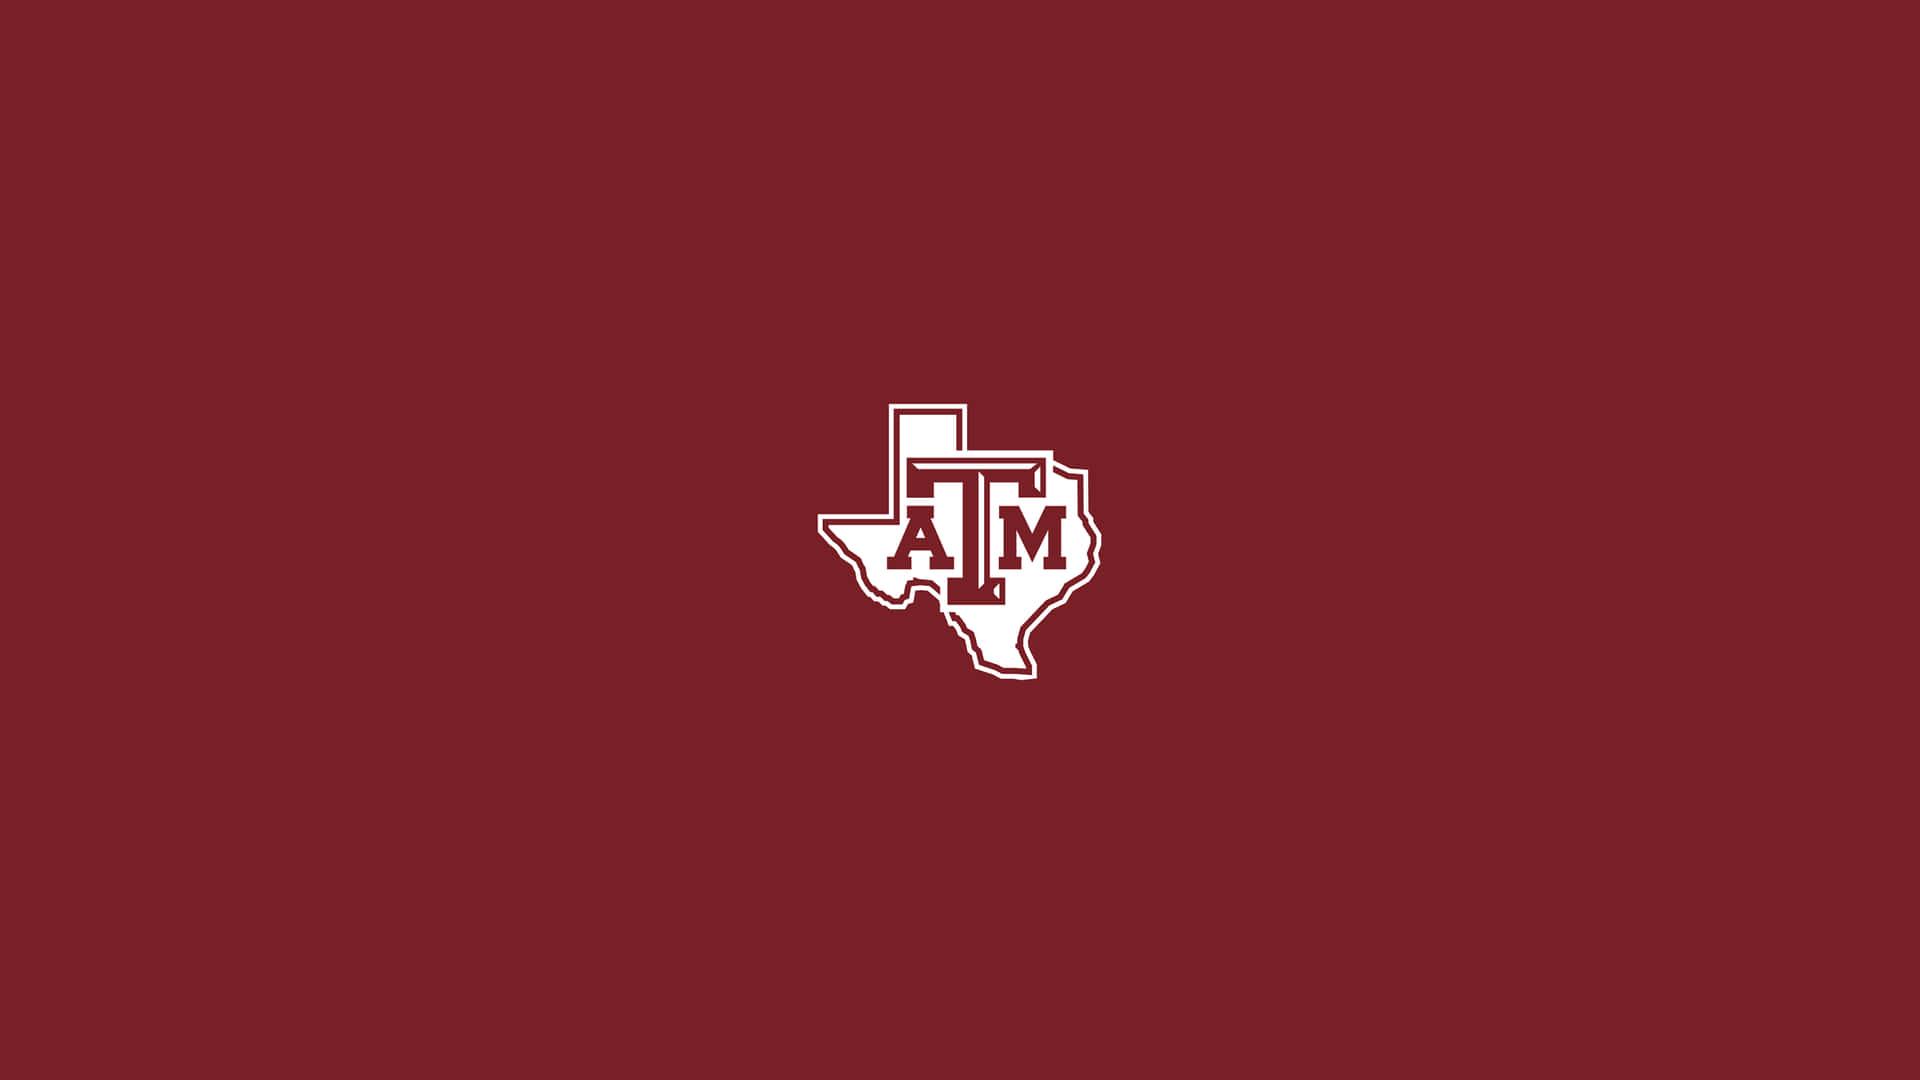 A Maroon Background With The Texas A&m Logo Wallpaper